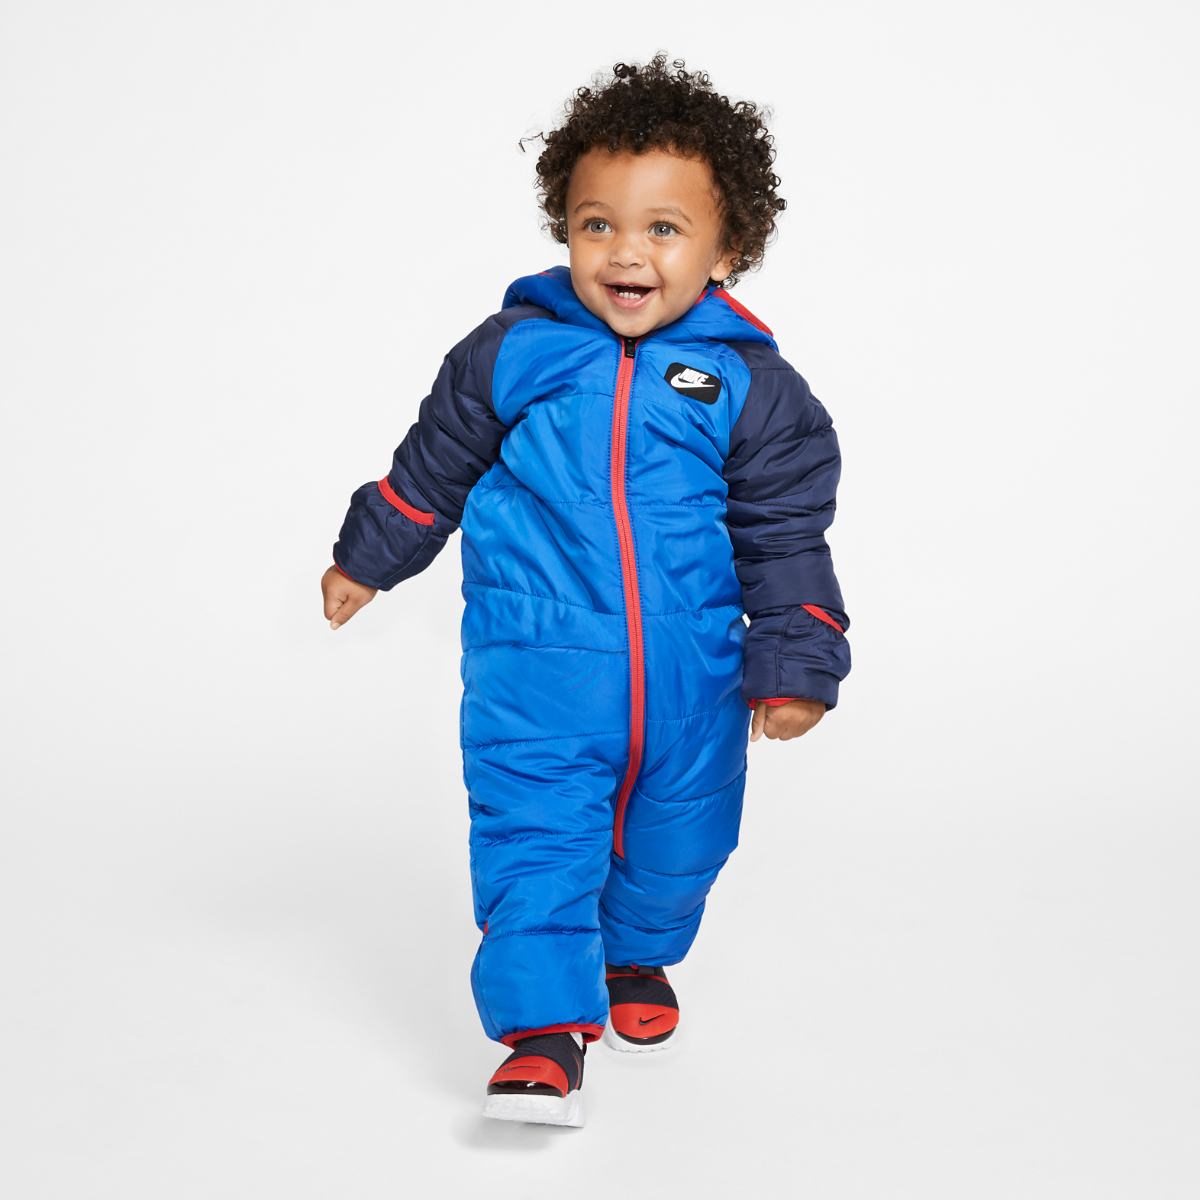 Ski Suit Nike Wax - Blue/Red